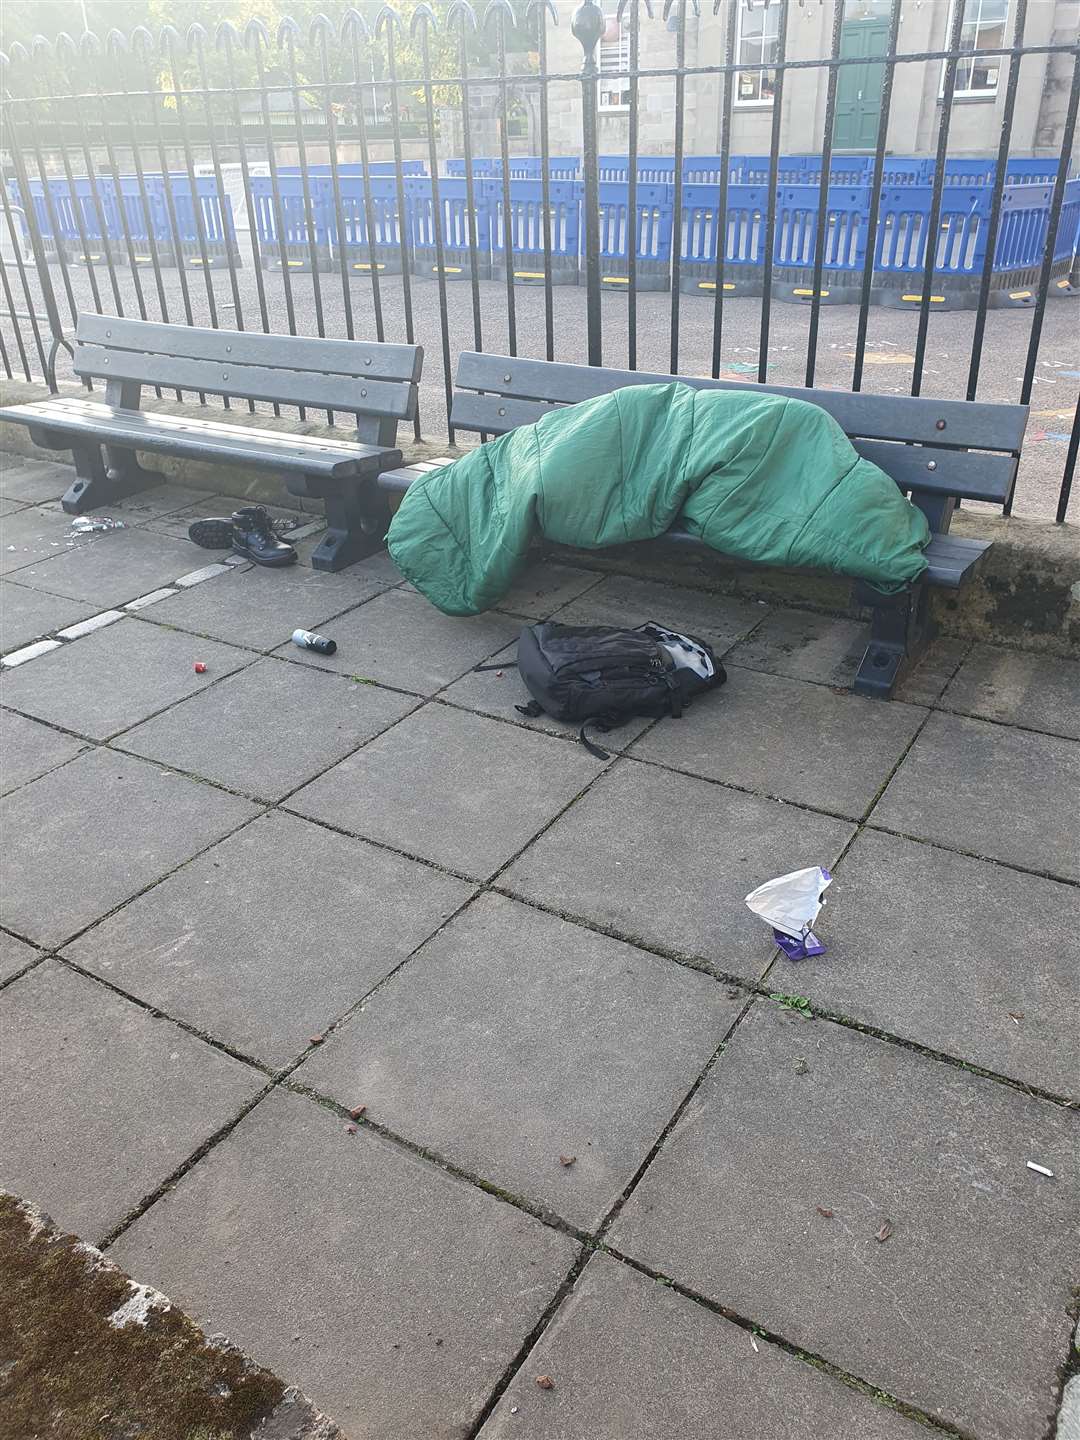 Graham Murdoch attempted to call the police twice to have a rough sleeper removed before young pupils arrived for school.